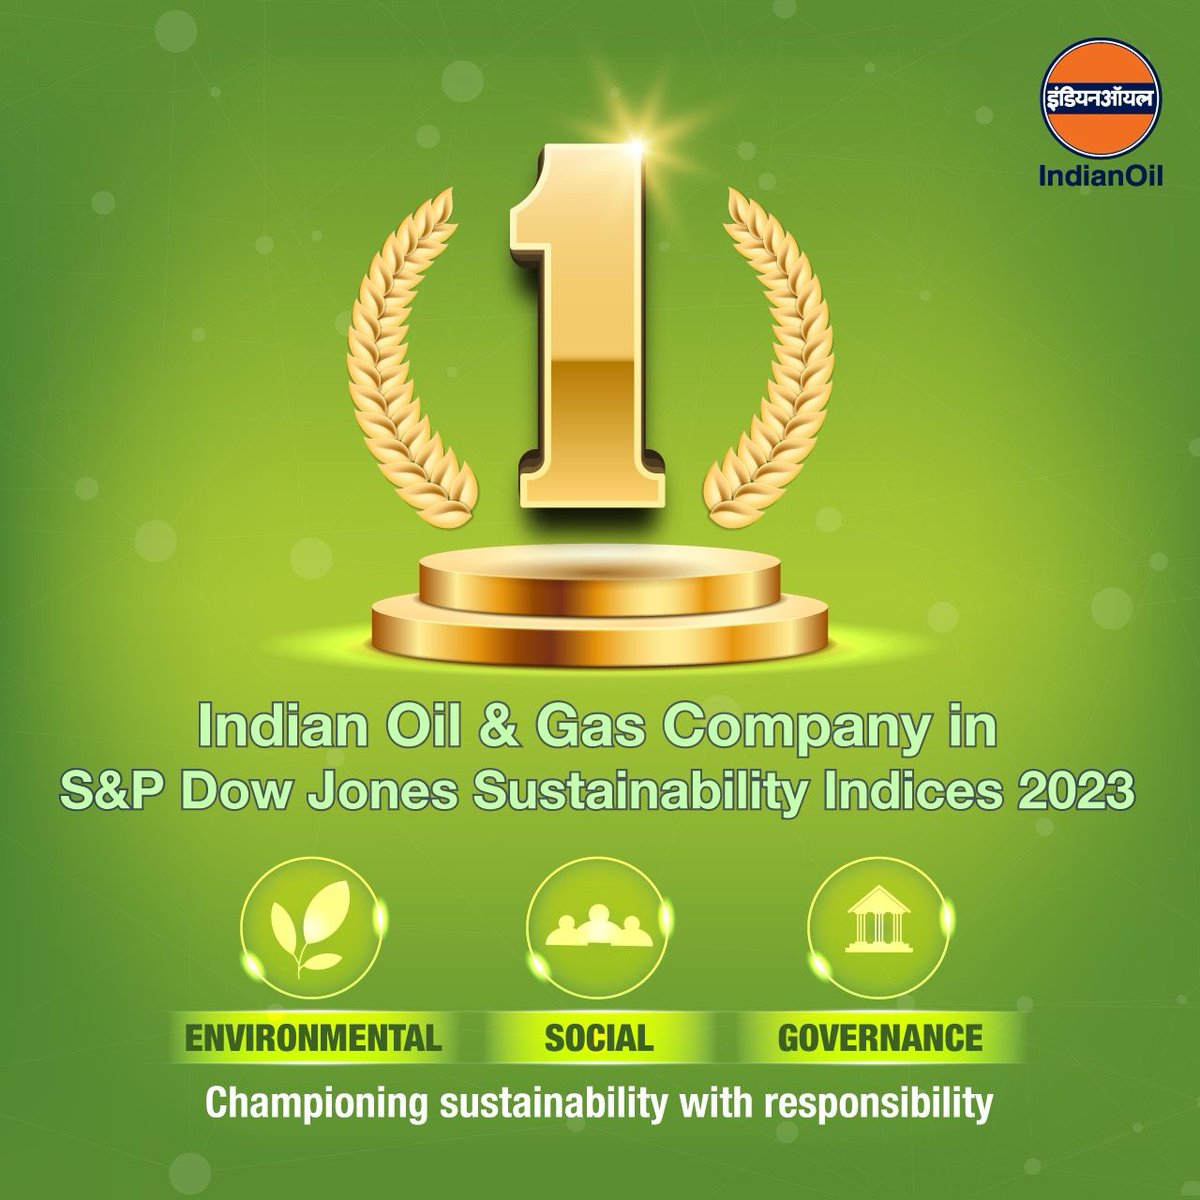 Delighted to share that #IndianOil is ranked as India’s #1 oil & gas company in S&P Dow Jones Sustainability Indices 2023. Setting new benchmarks, we are committed to fostering the highest standards of environmental, social & governance in our business. #ESGLeadership